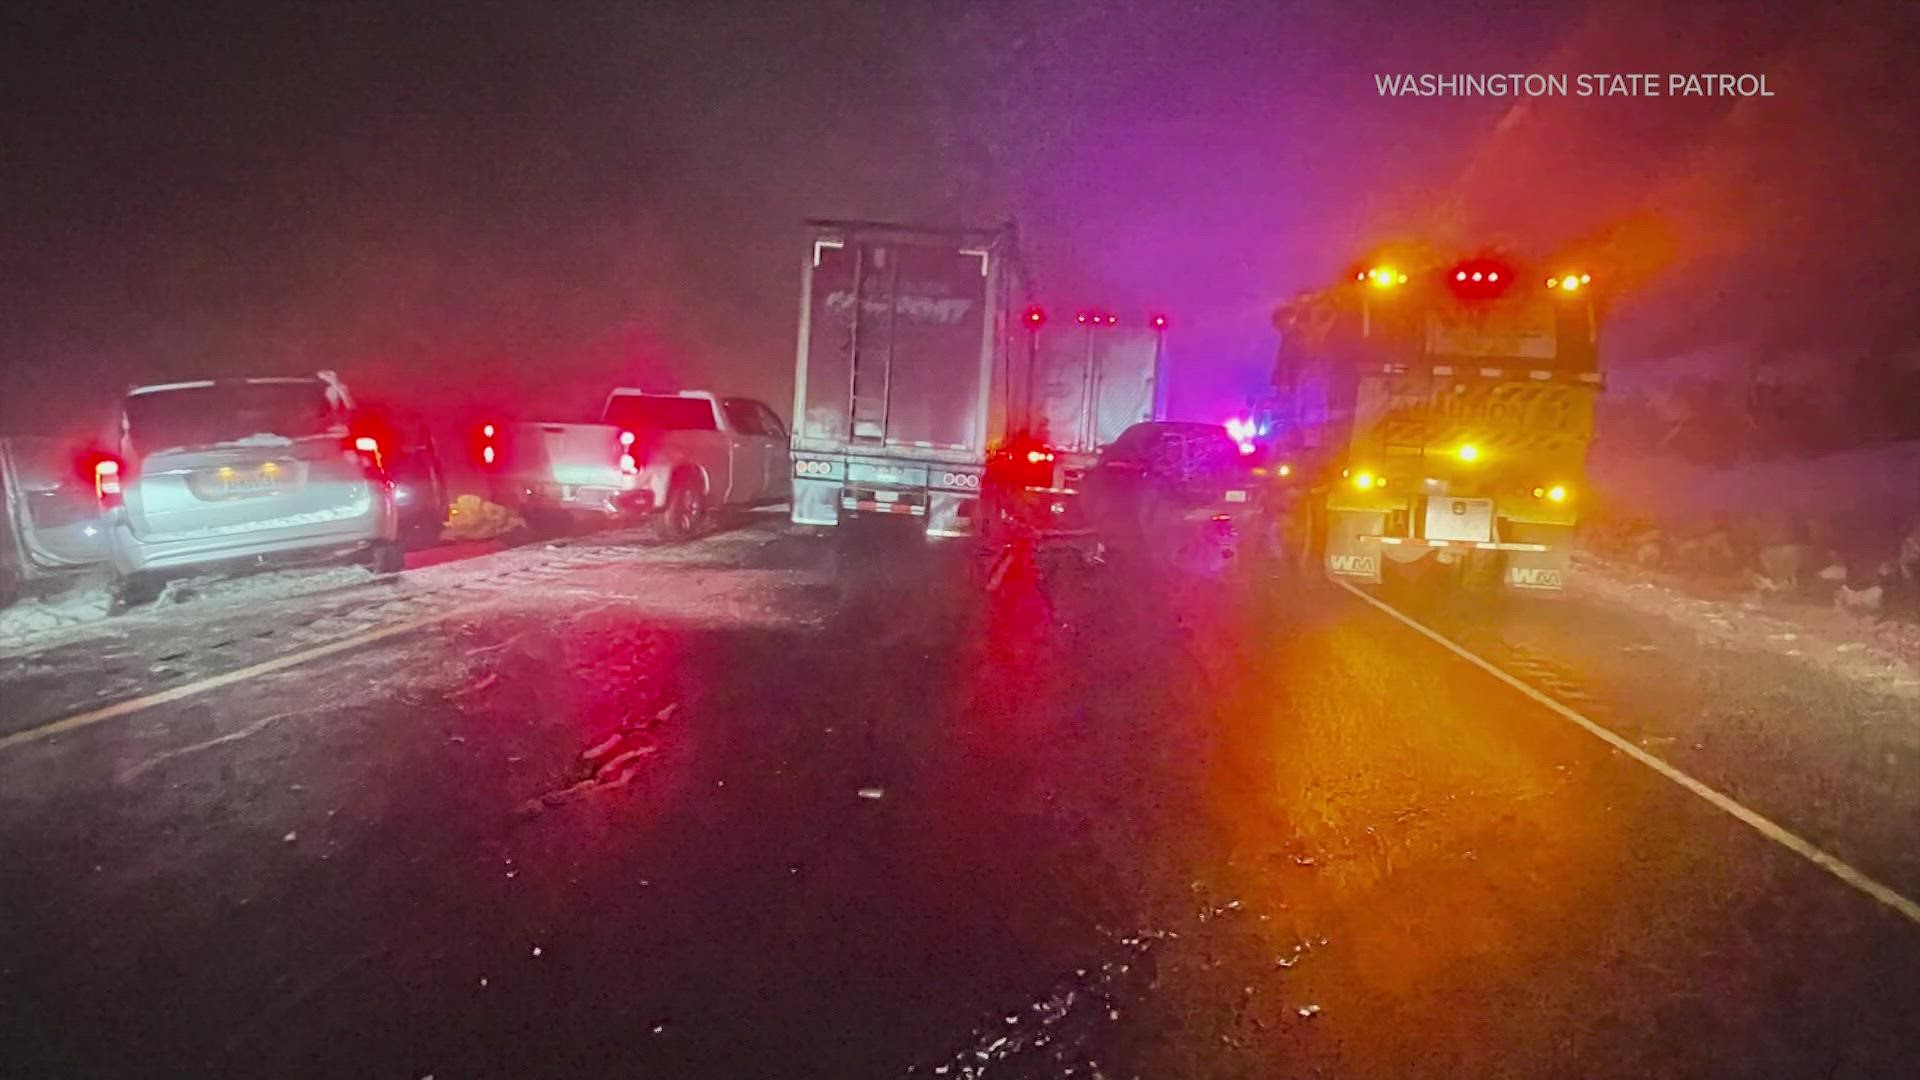 The large pileup happened at about 5:30 a.m. The highway reopened around 3:30 p.m.